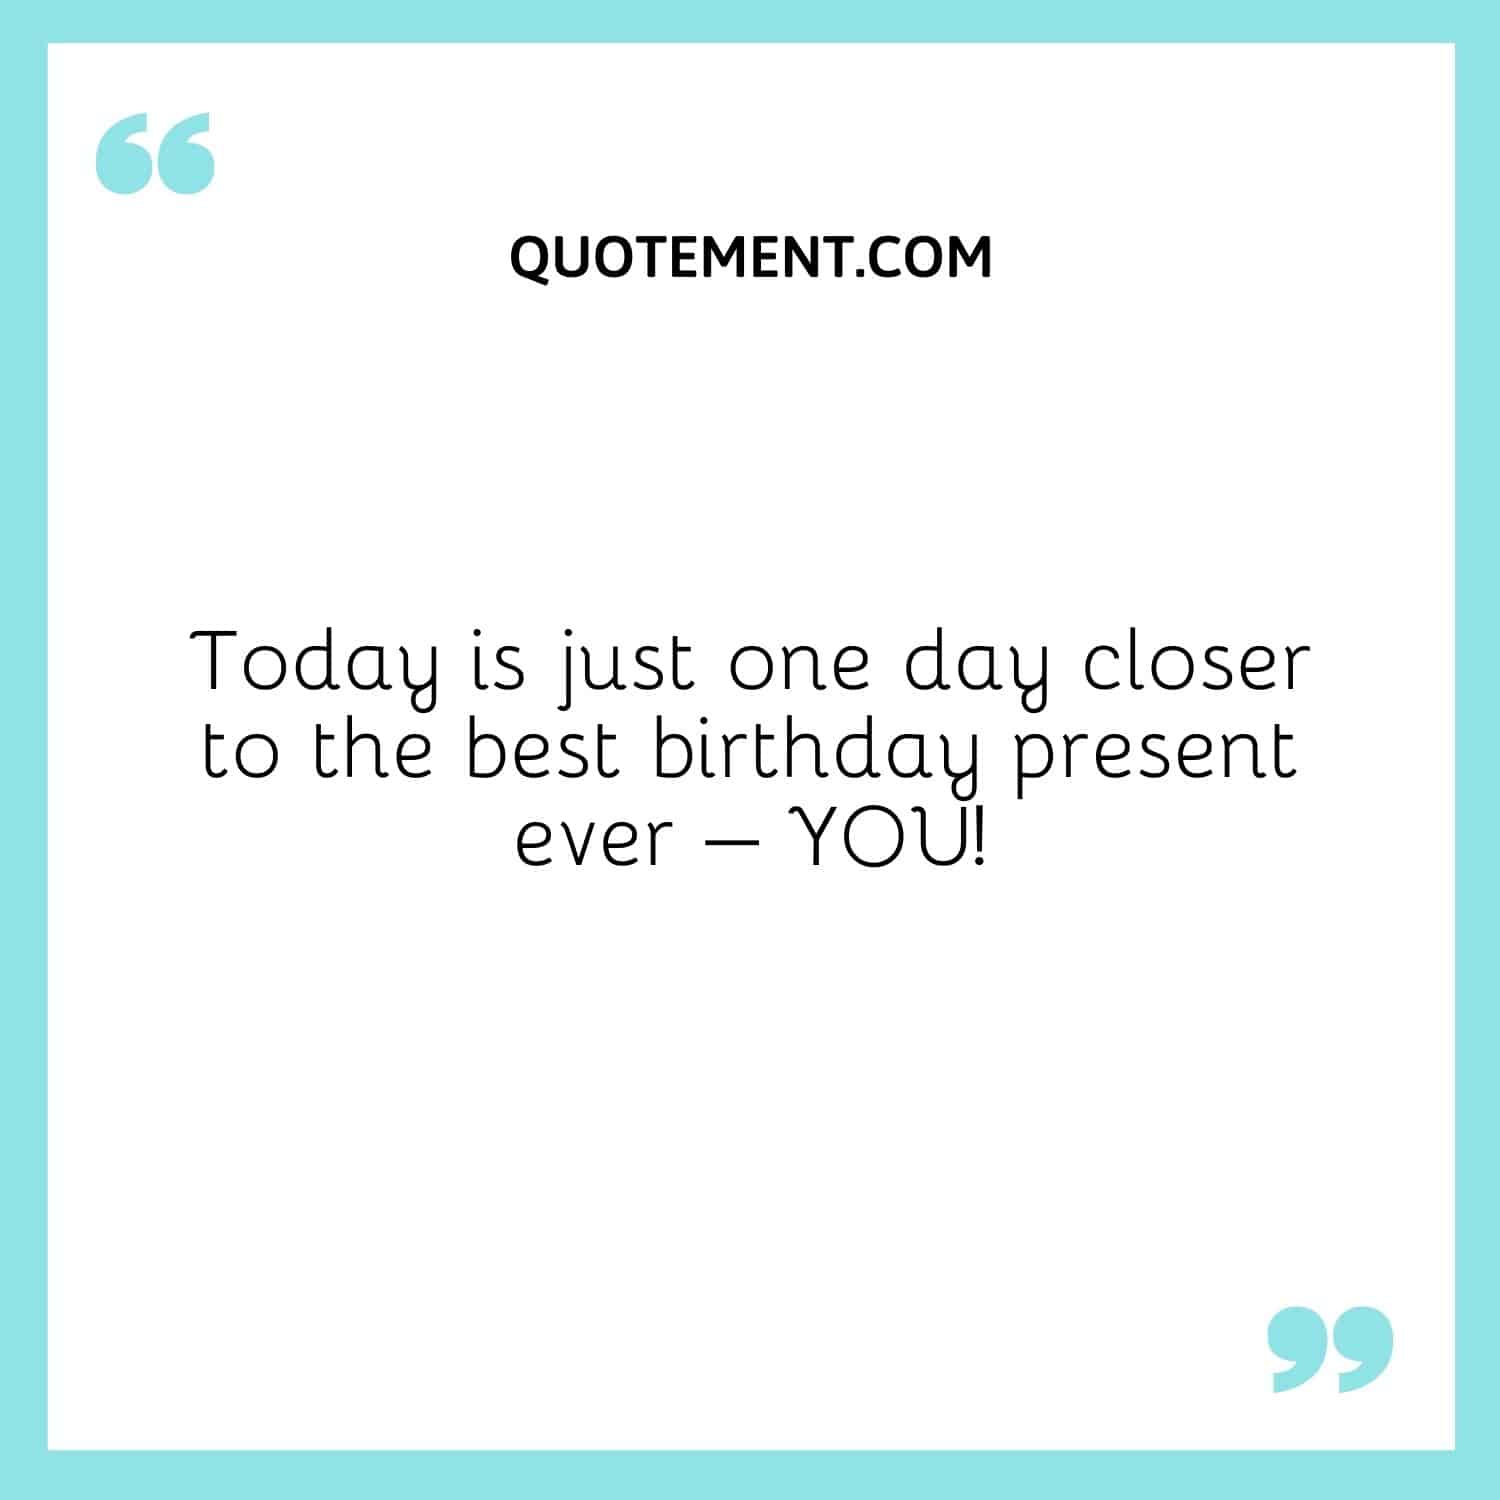 Today is just one day closer to the best birthday present ever – YOU!